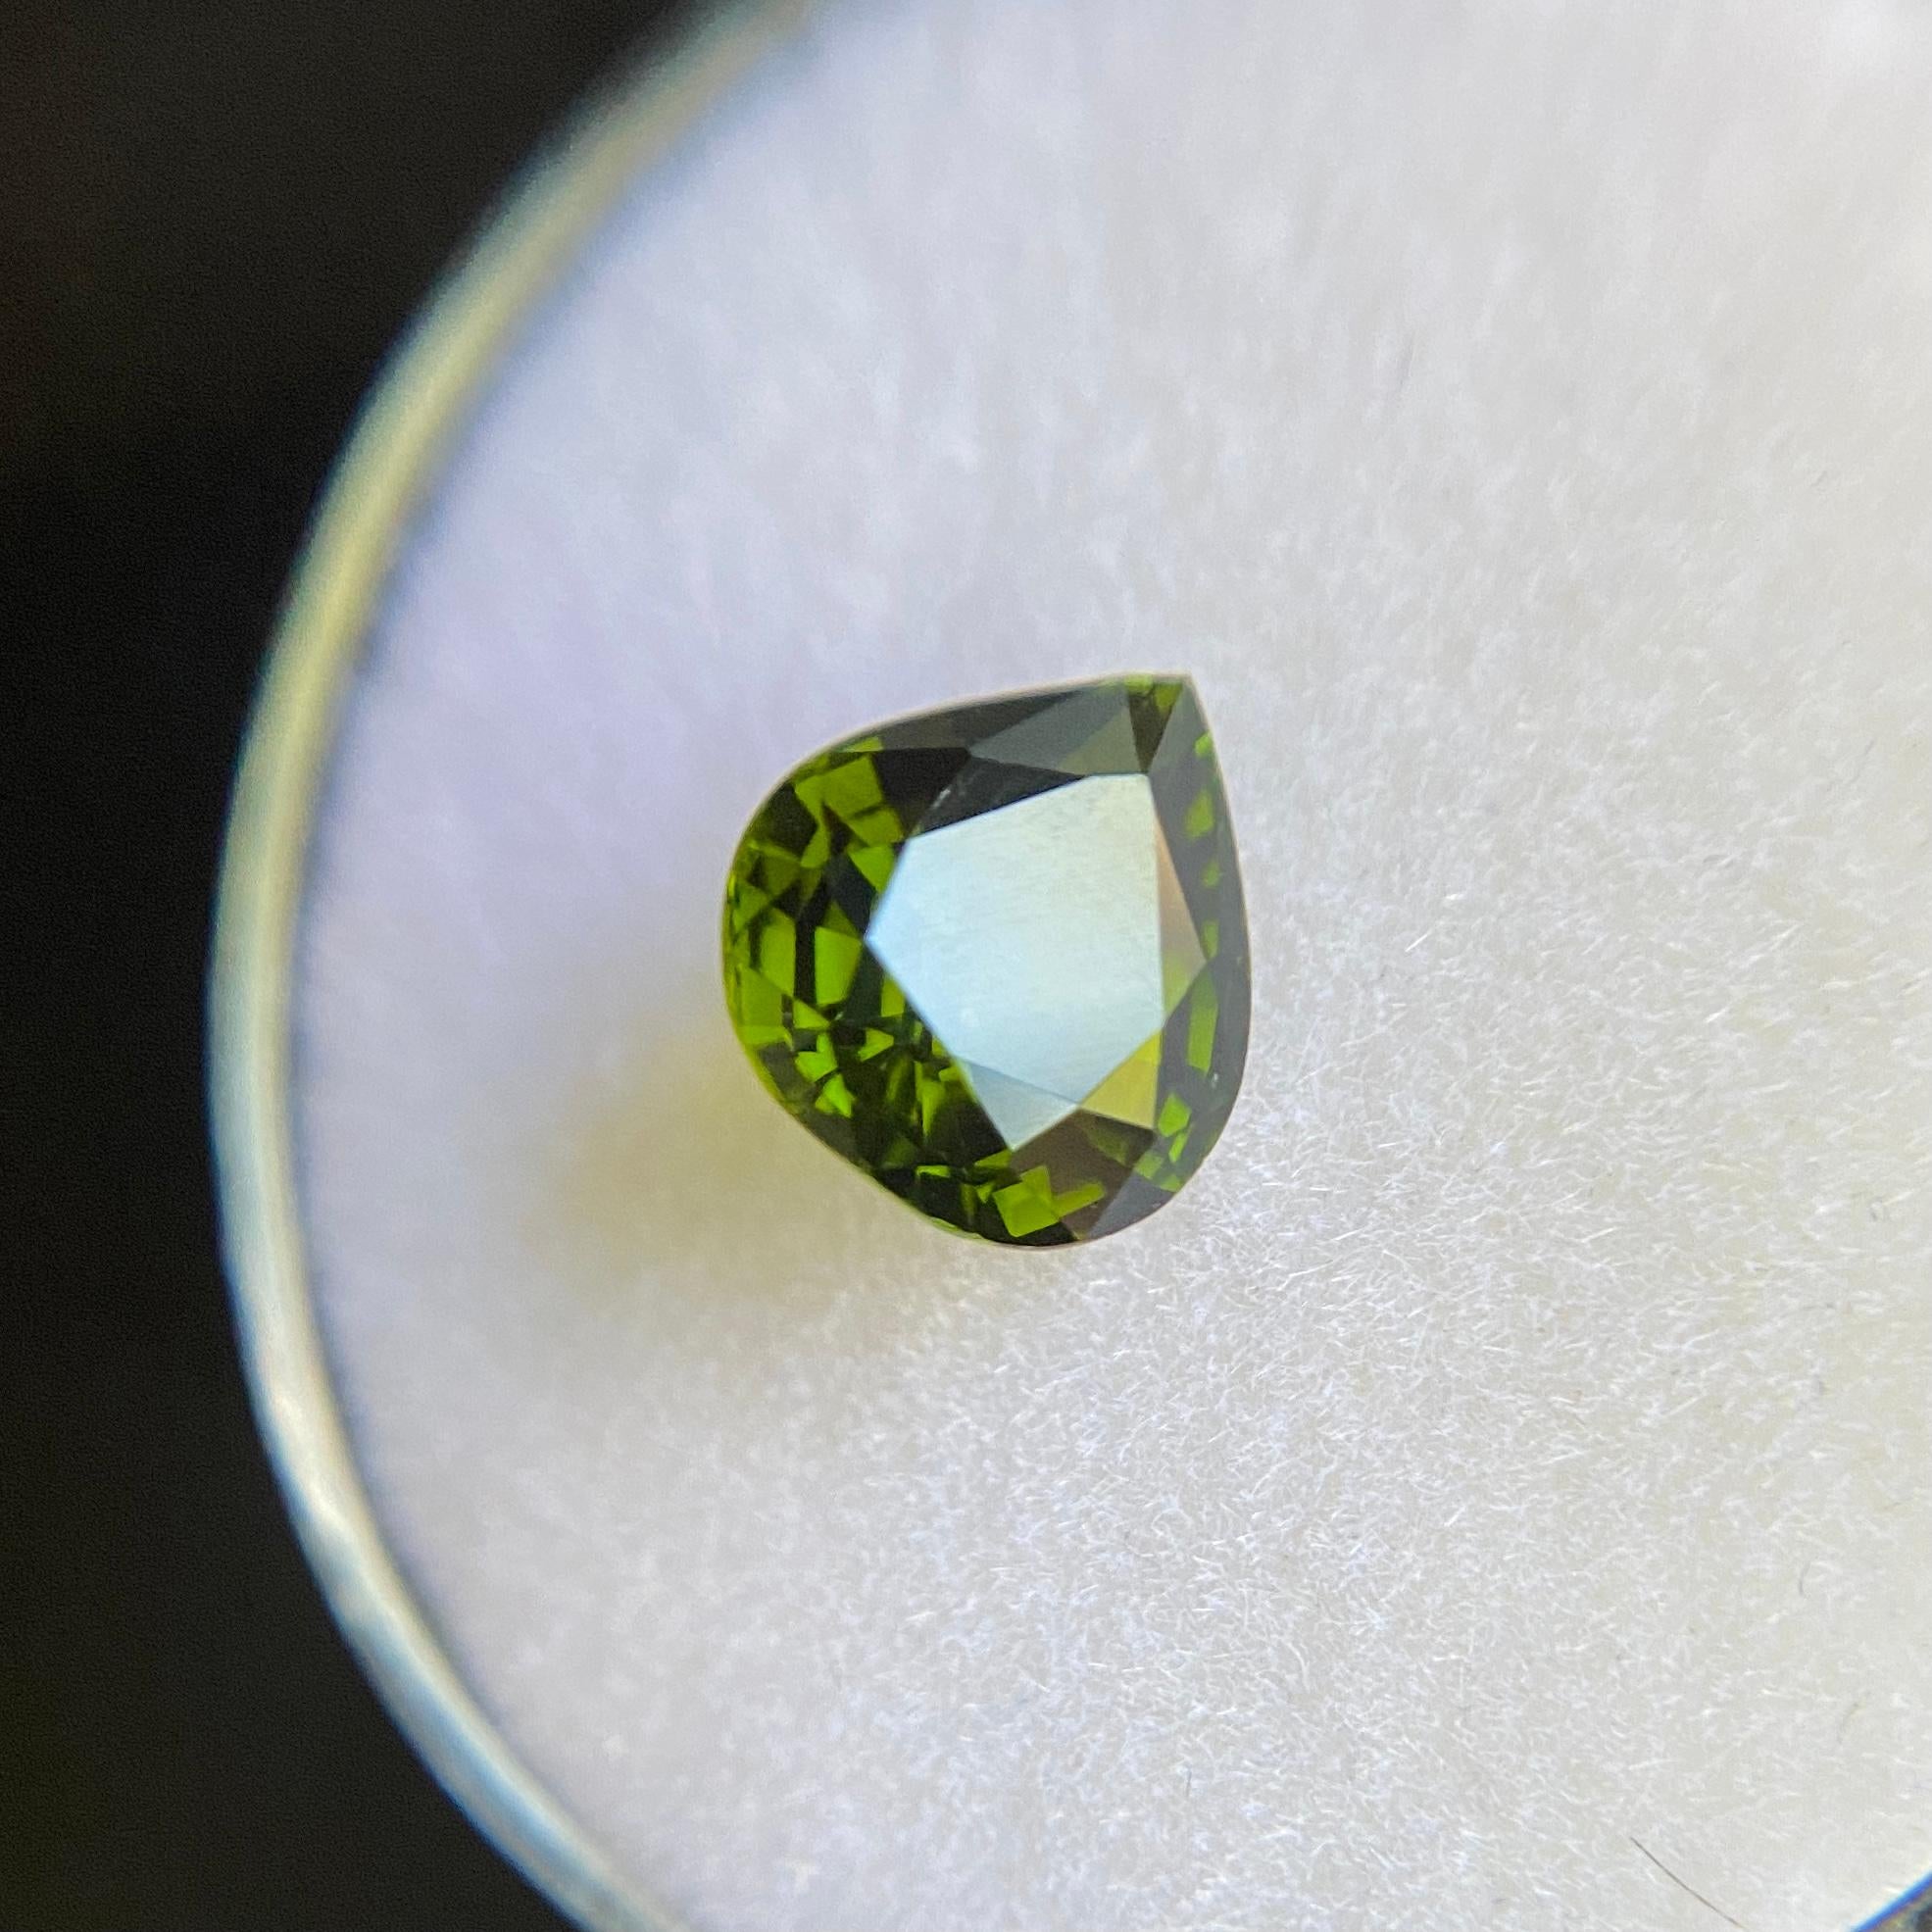 Natural Deep Green Tourmaline Gemstone.

1.17 Carat with a beautiful deep green colour and very good clarity, some small natural inclusions visible when looking closely. No breaks or cracks.

Also has a very good pear cut with good proportions and